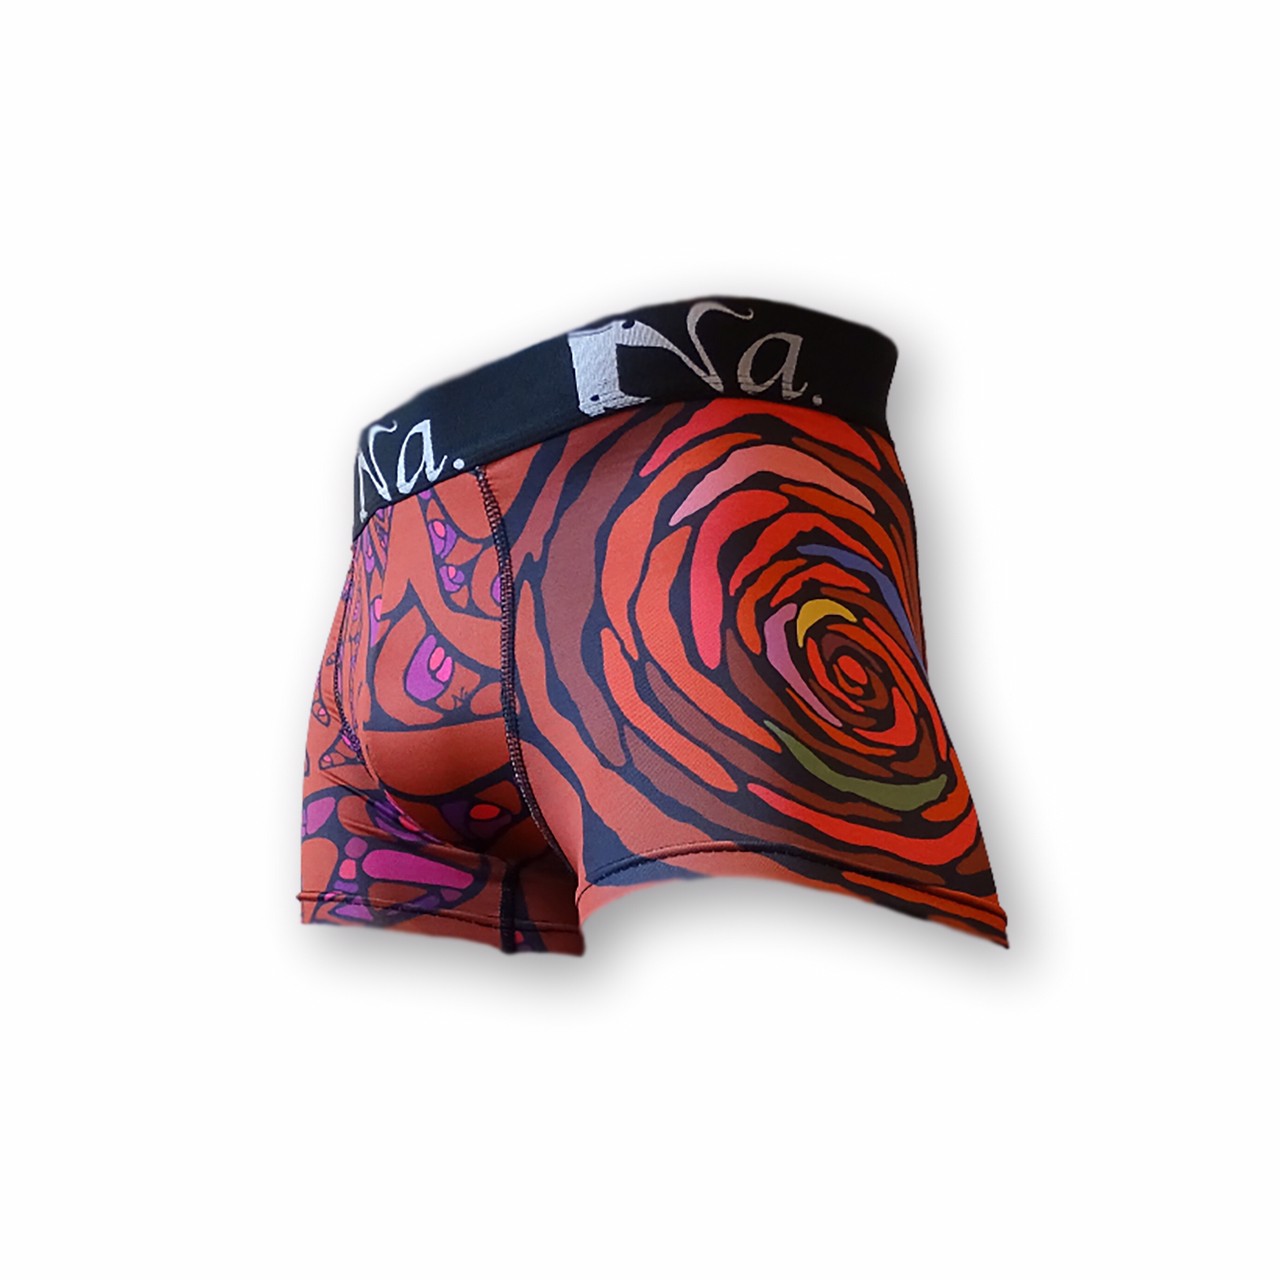 Art boxer shorts "Love is rosy"